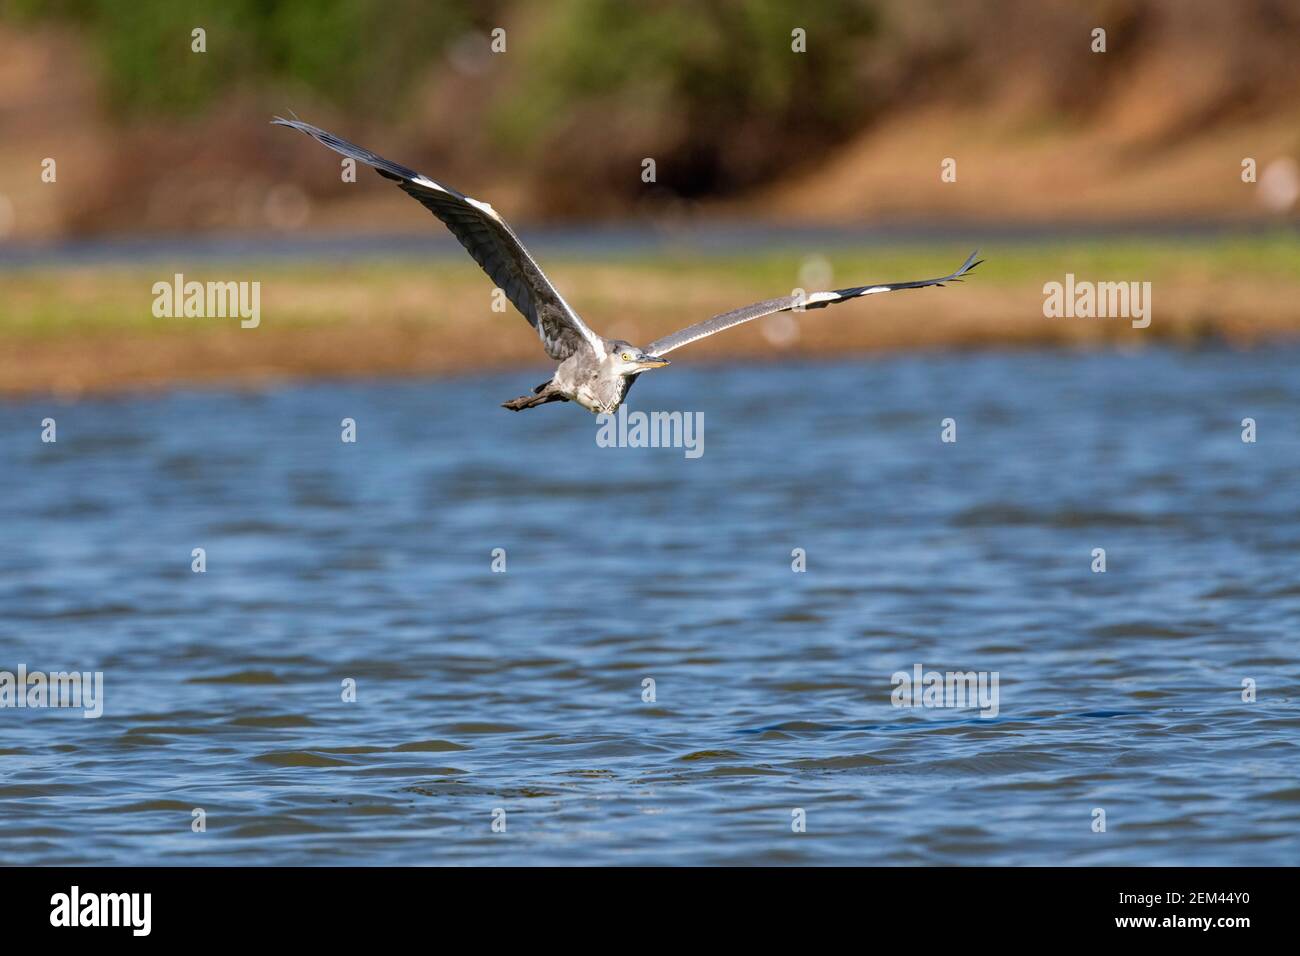 A Grey heron seen flying over water in Zimbabwe's Mana Pools National Park. Stock Photo